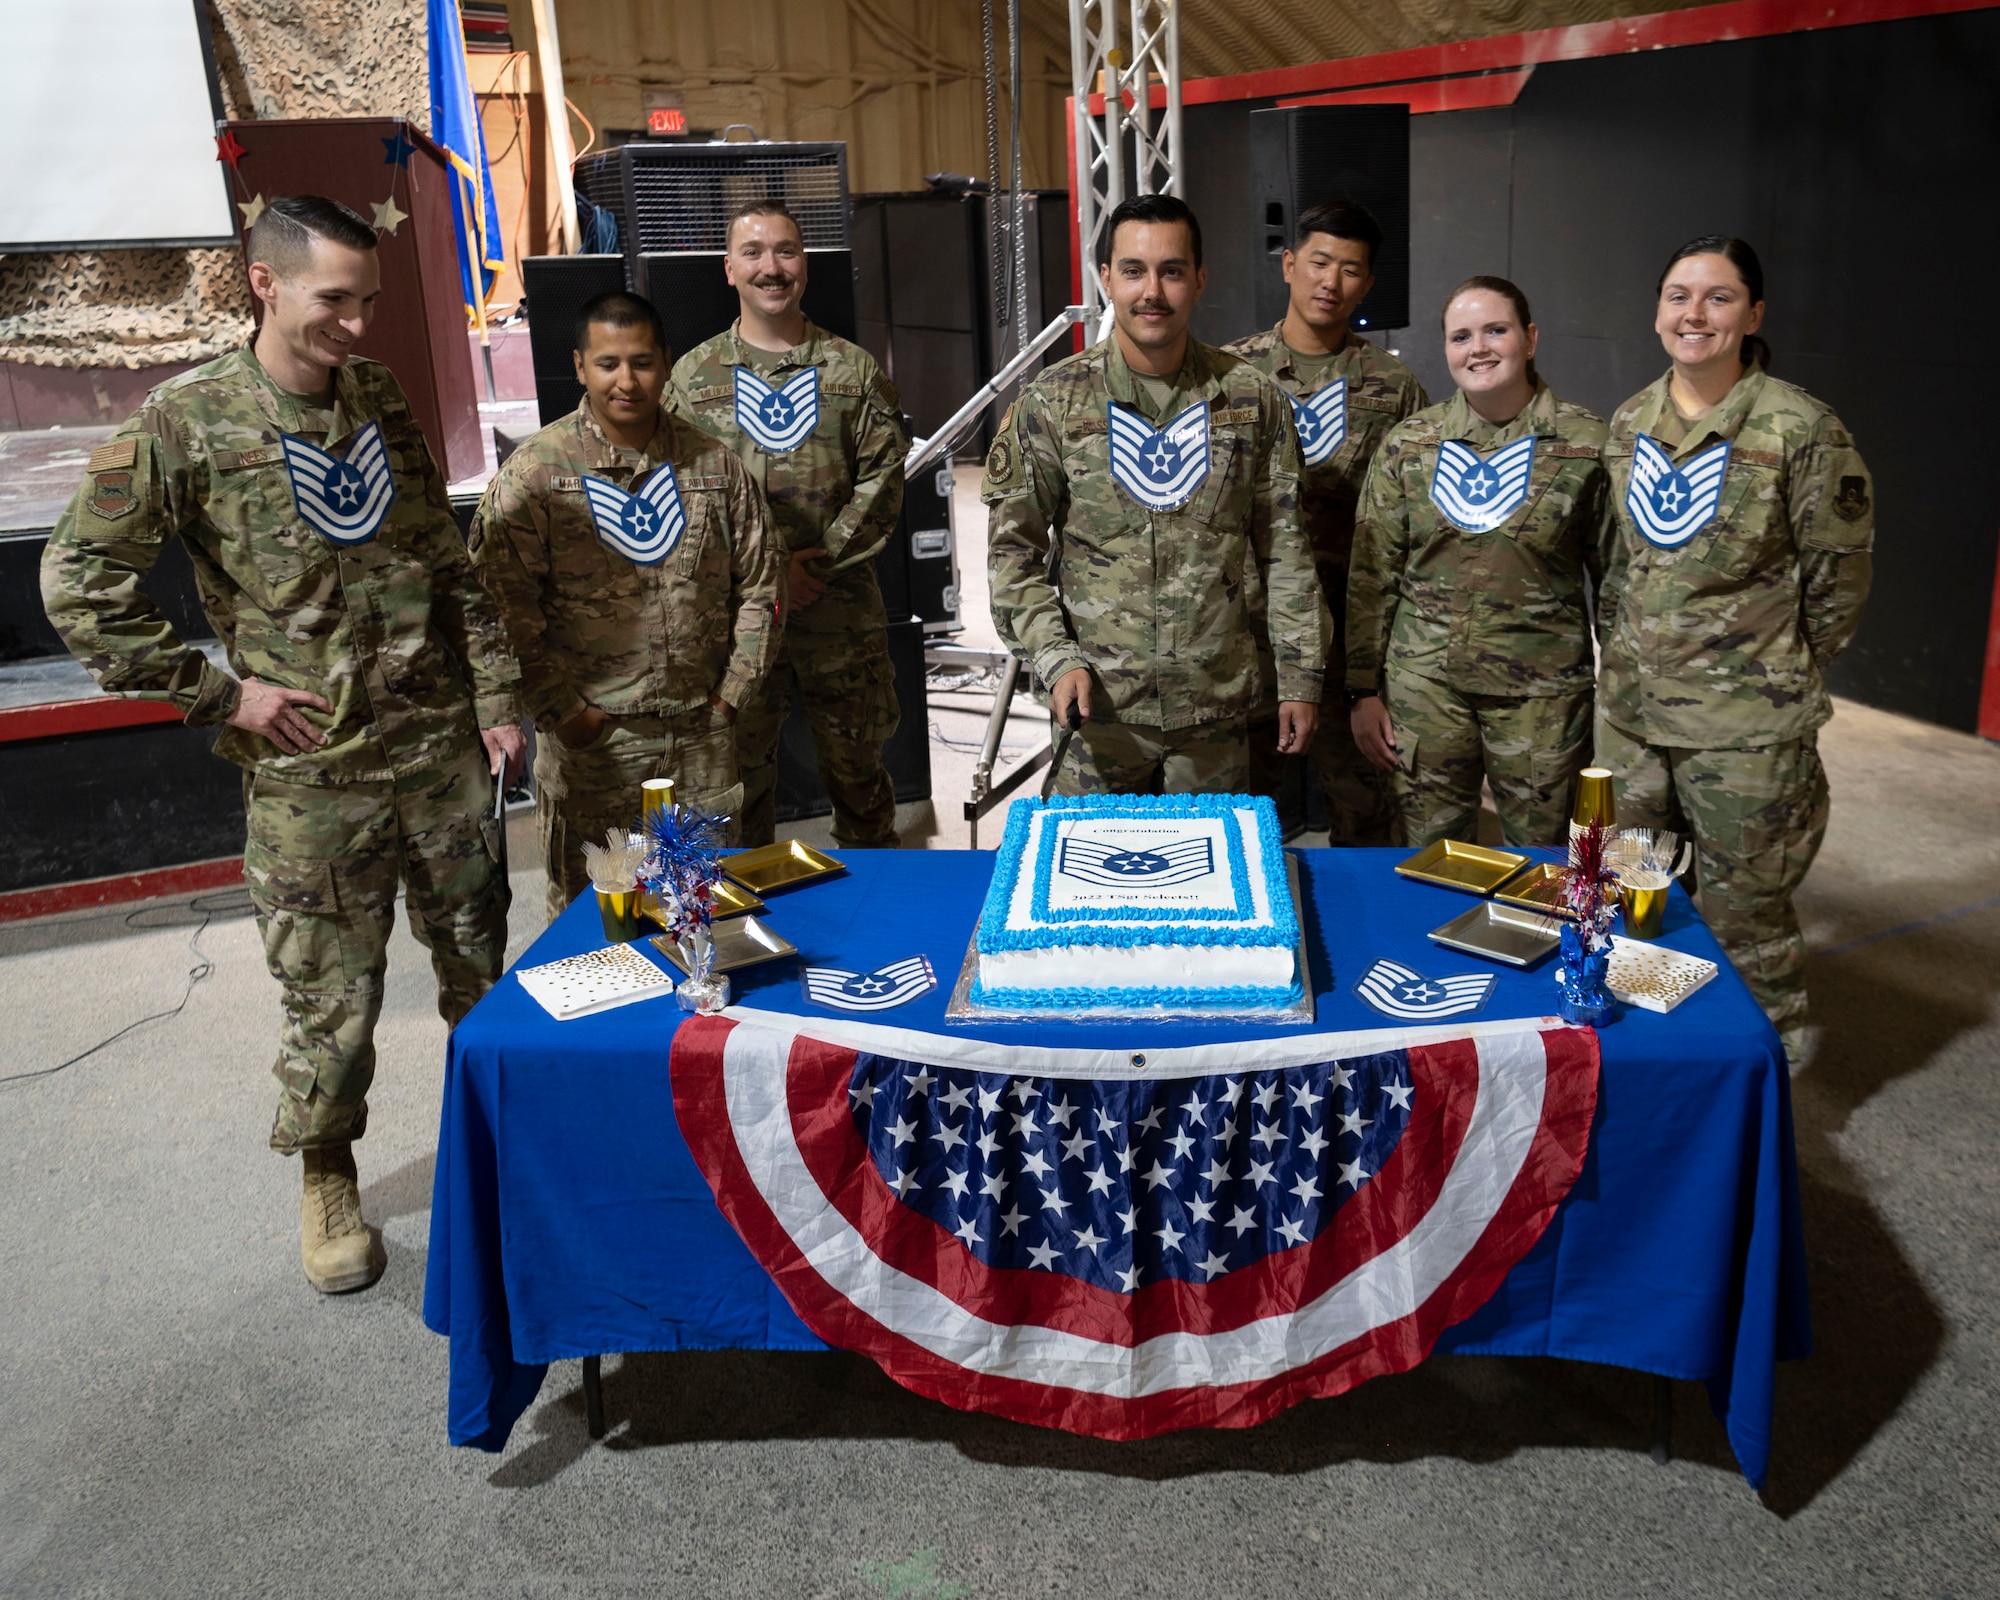 The 332d Air Expeditionary Wing celebrates with an E-6 release party for those Airmen selected to promote to Technical Sergeant at an undisclosed location in Southwest Asia, July 23, 2022. 332d AEW Commander Brigadier General R. Ryan Messer along with Command Chief Master Sergeant Kevin M. Eberlin help celebrate the occasion. Promotion to TSgt is very competitive, this year the promotion rate is only 16%. Promotions exemplify technical skills, leadership, and a standard of excellence. (U.S Air Force photo by Tech. Sgt. Jeffery Foster)